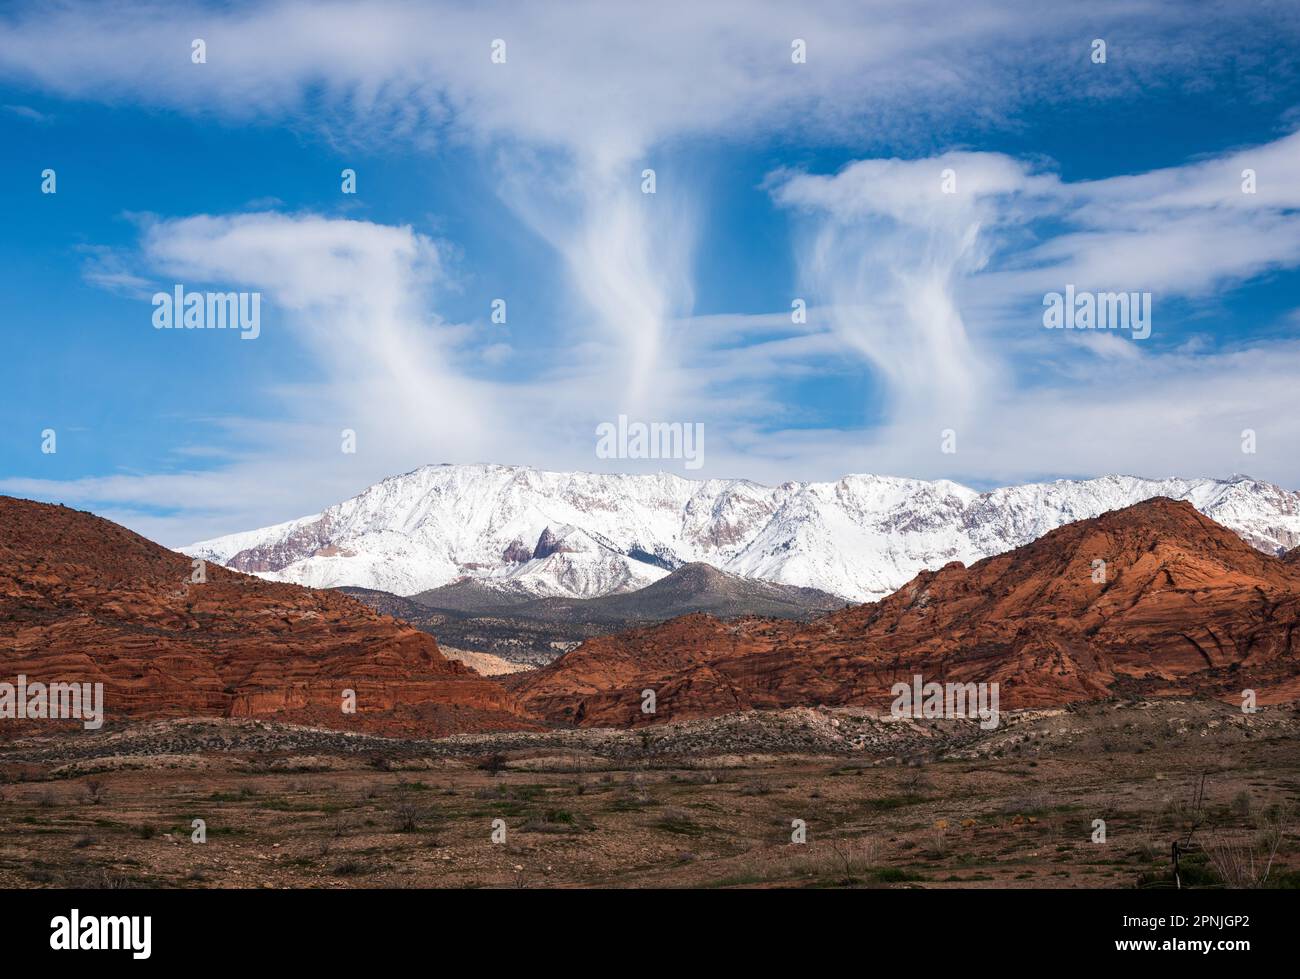 Lenticular clouds over the Snow Covered Mtns. of Pine Valley Utah.  From desert to 8000 ft in 30 miles. Stock Photo